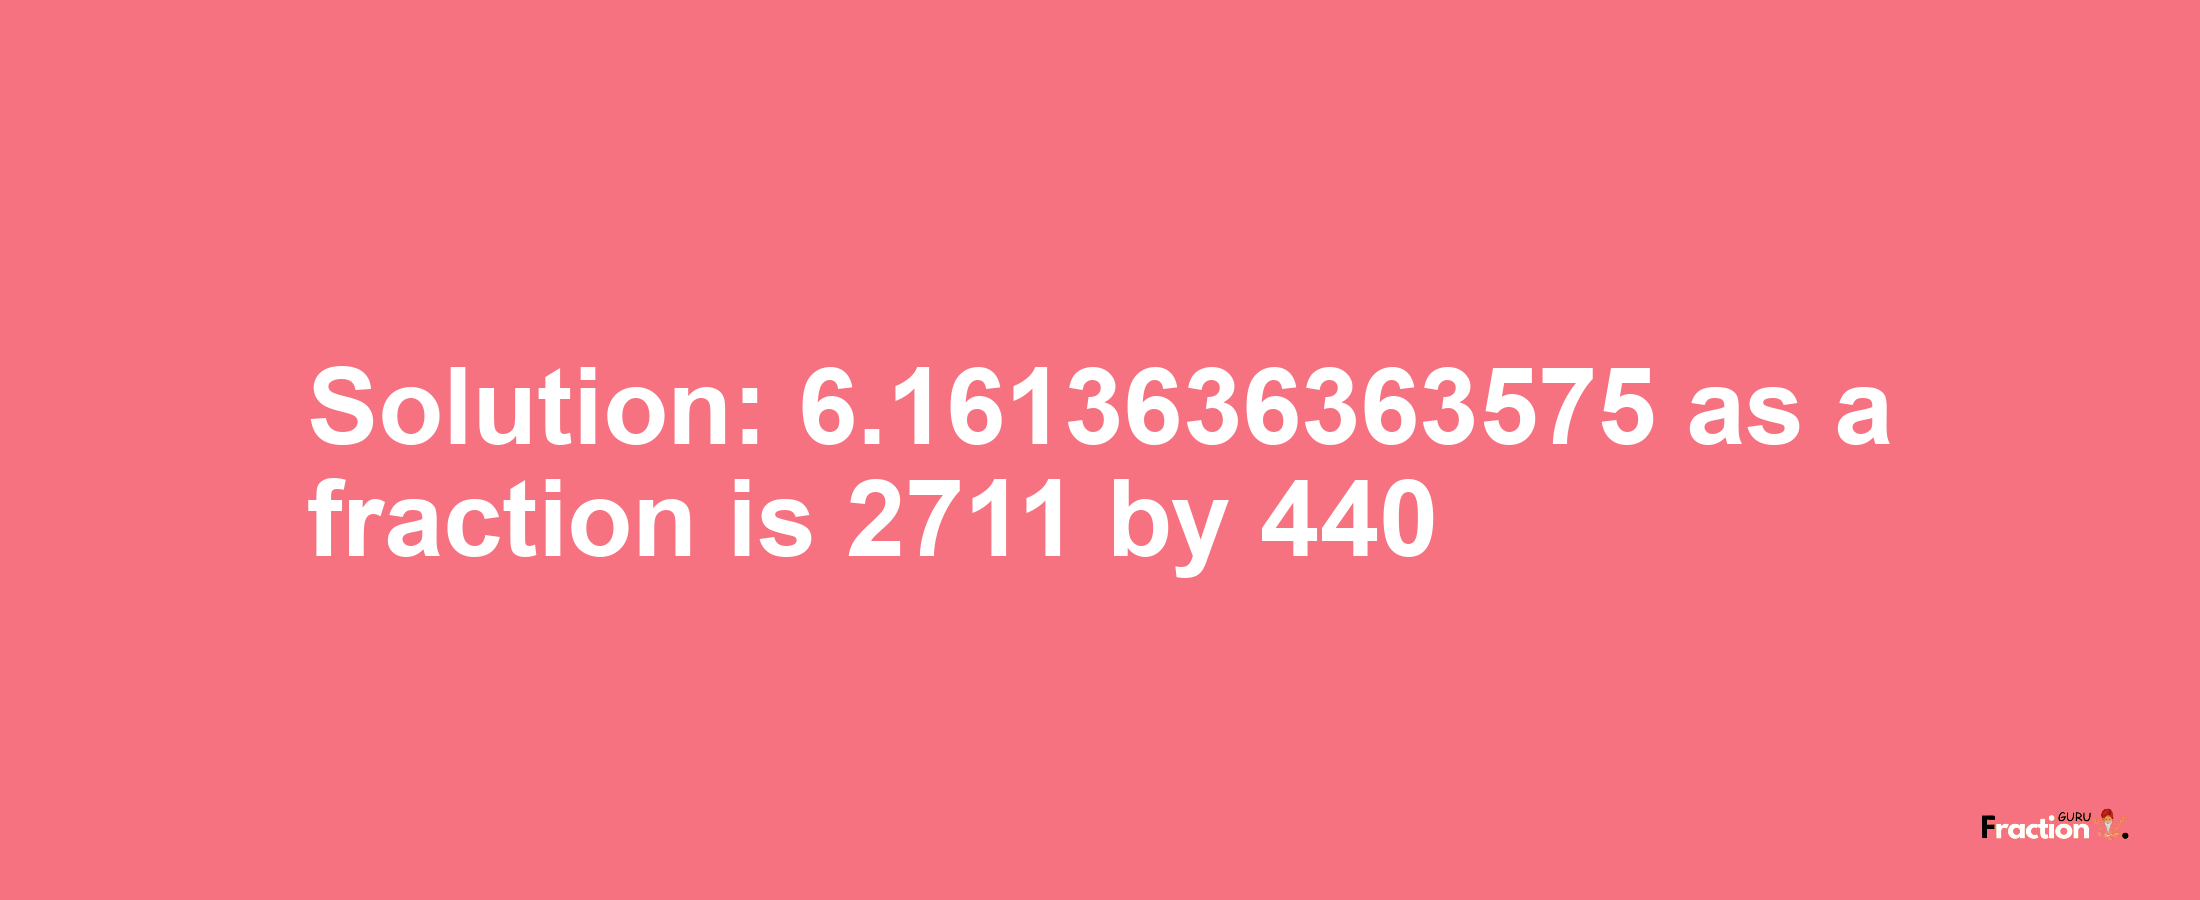 Solution:6.1613636363575 as a fraction is 2711/440